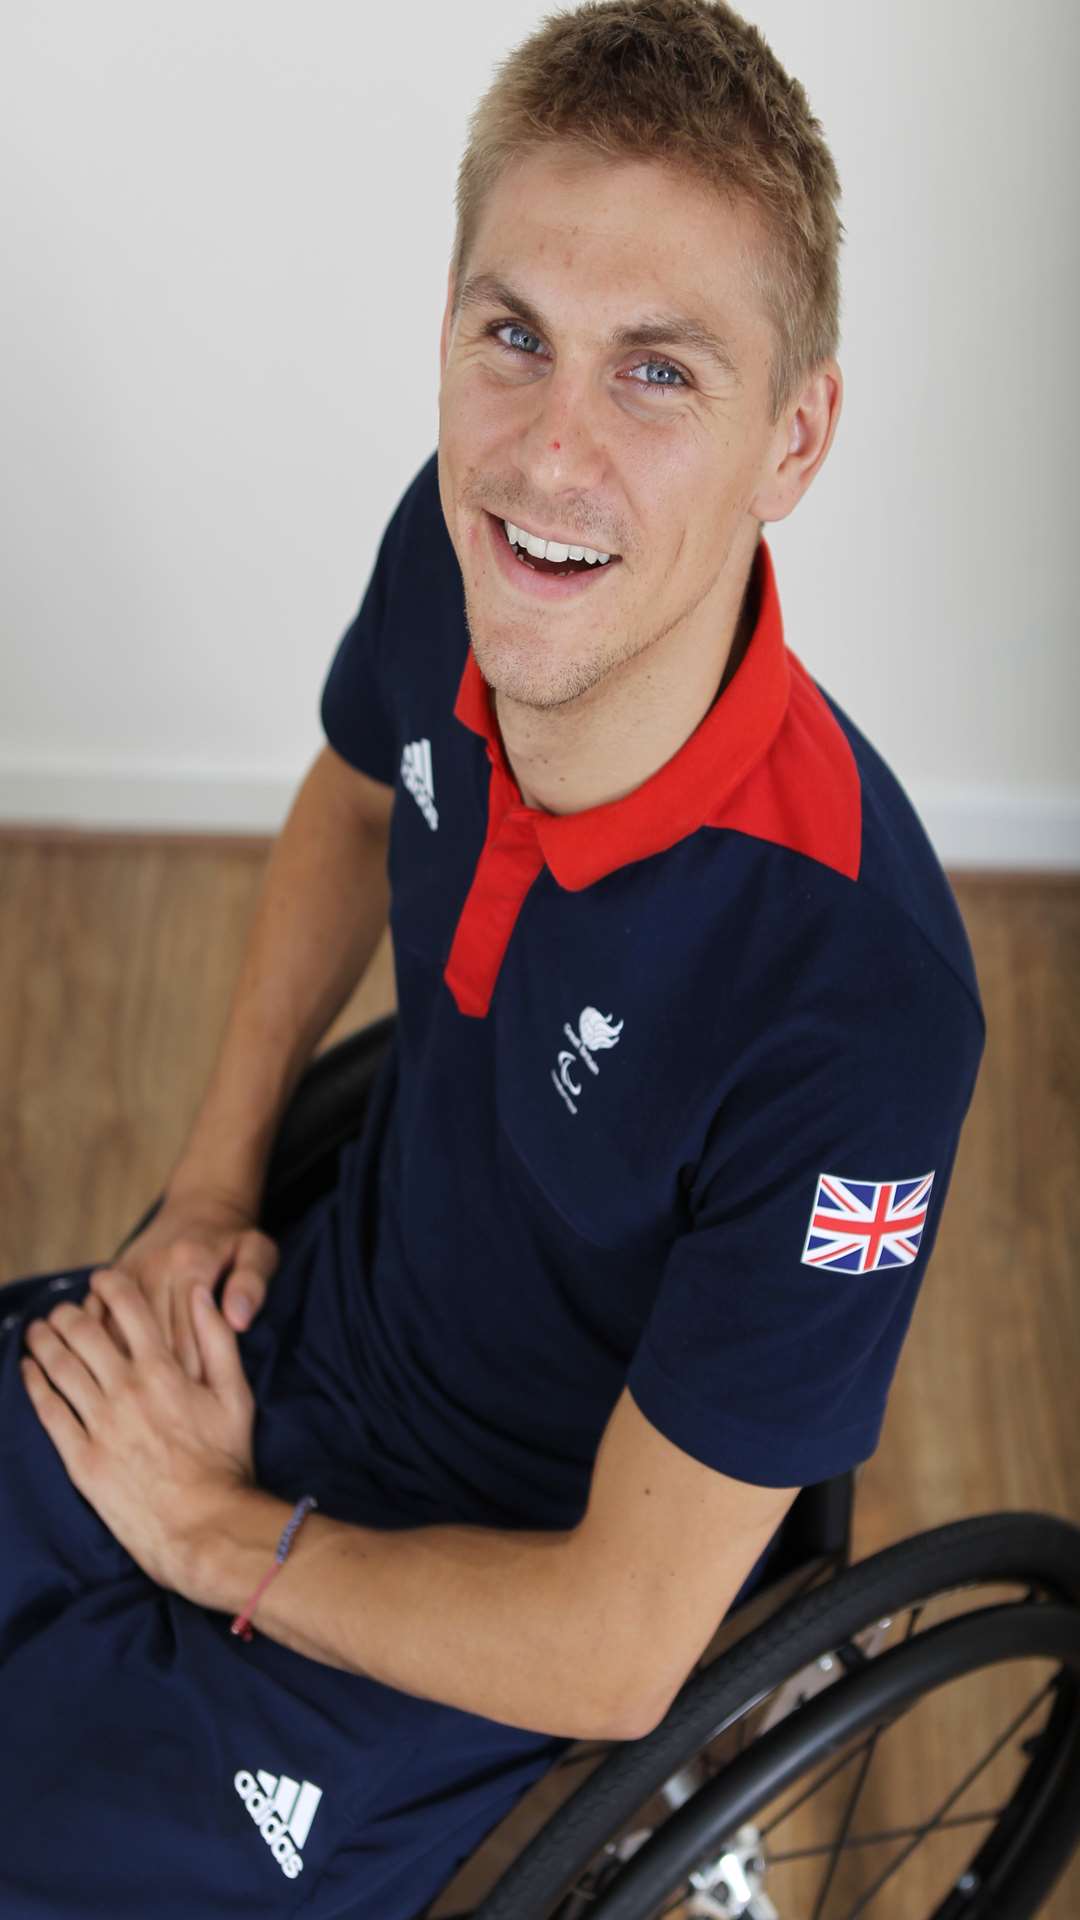 Steve Brown captained the paralympic rugby team at London 2012